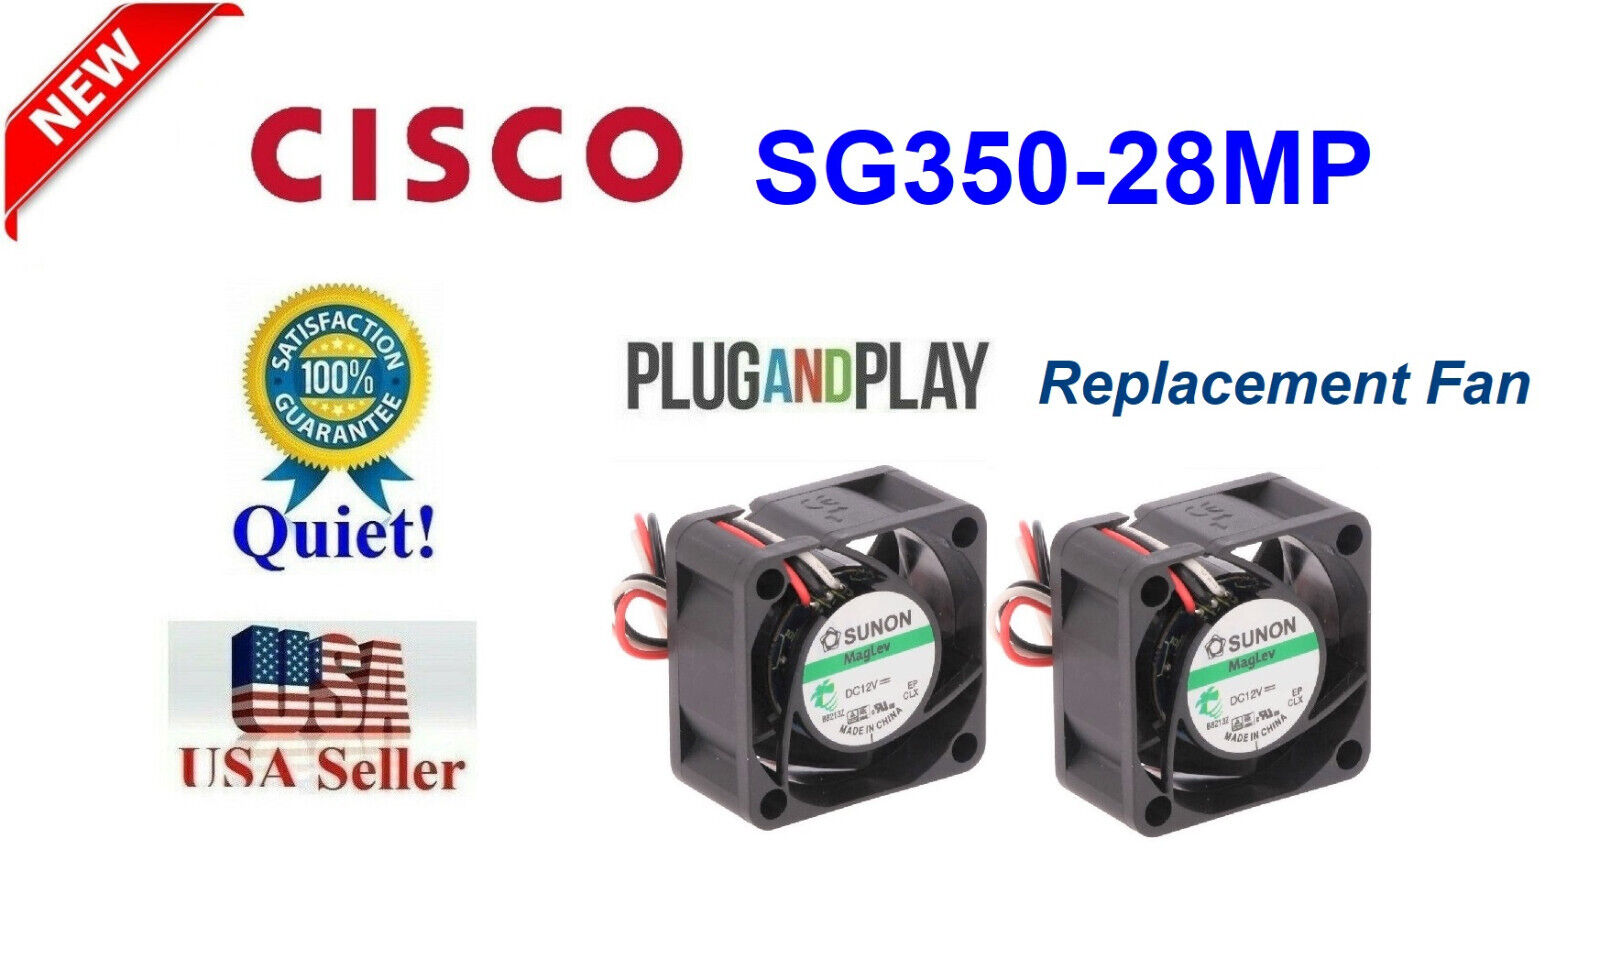 Pack 2x Quiet Replacemet Fans for Cisco SG350-28MP Managed Switch Low Noise